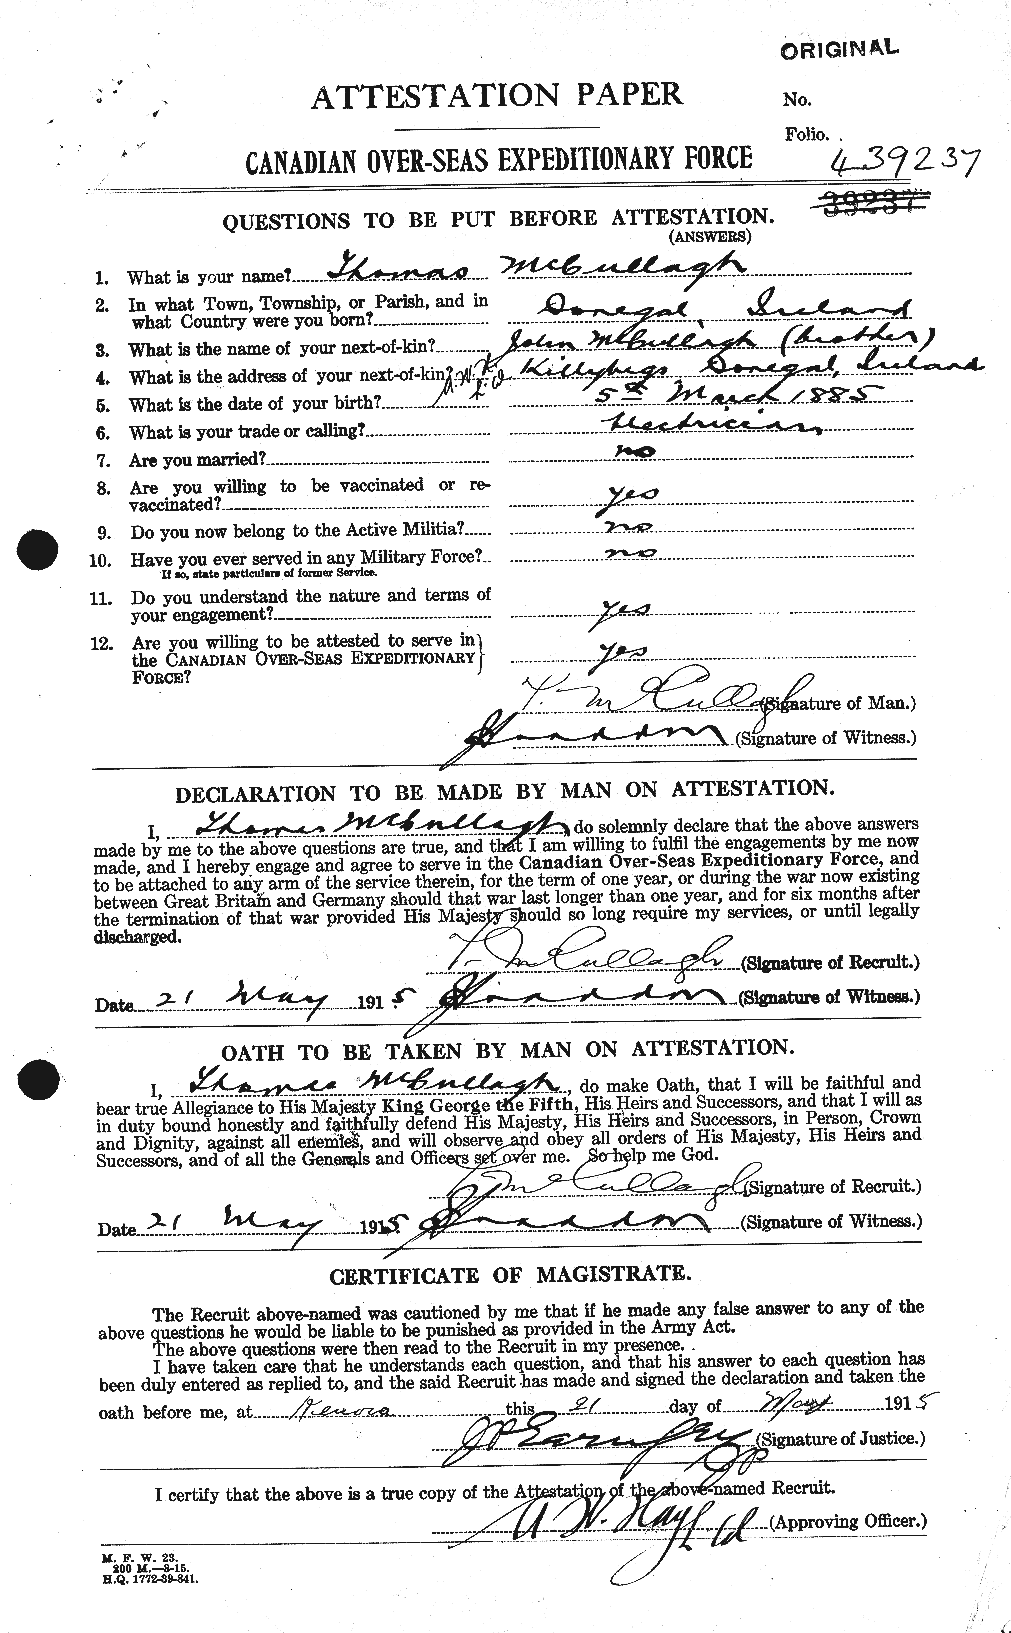 Personnel Records of the First World War - CEF 135416a